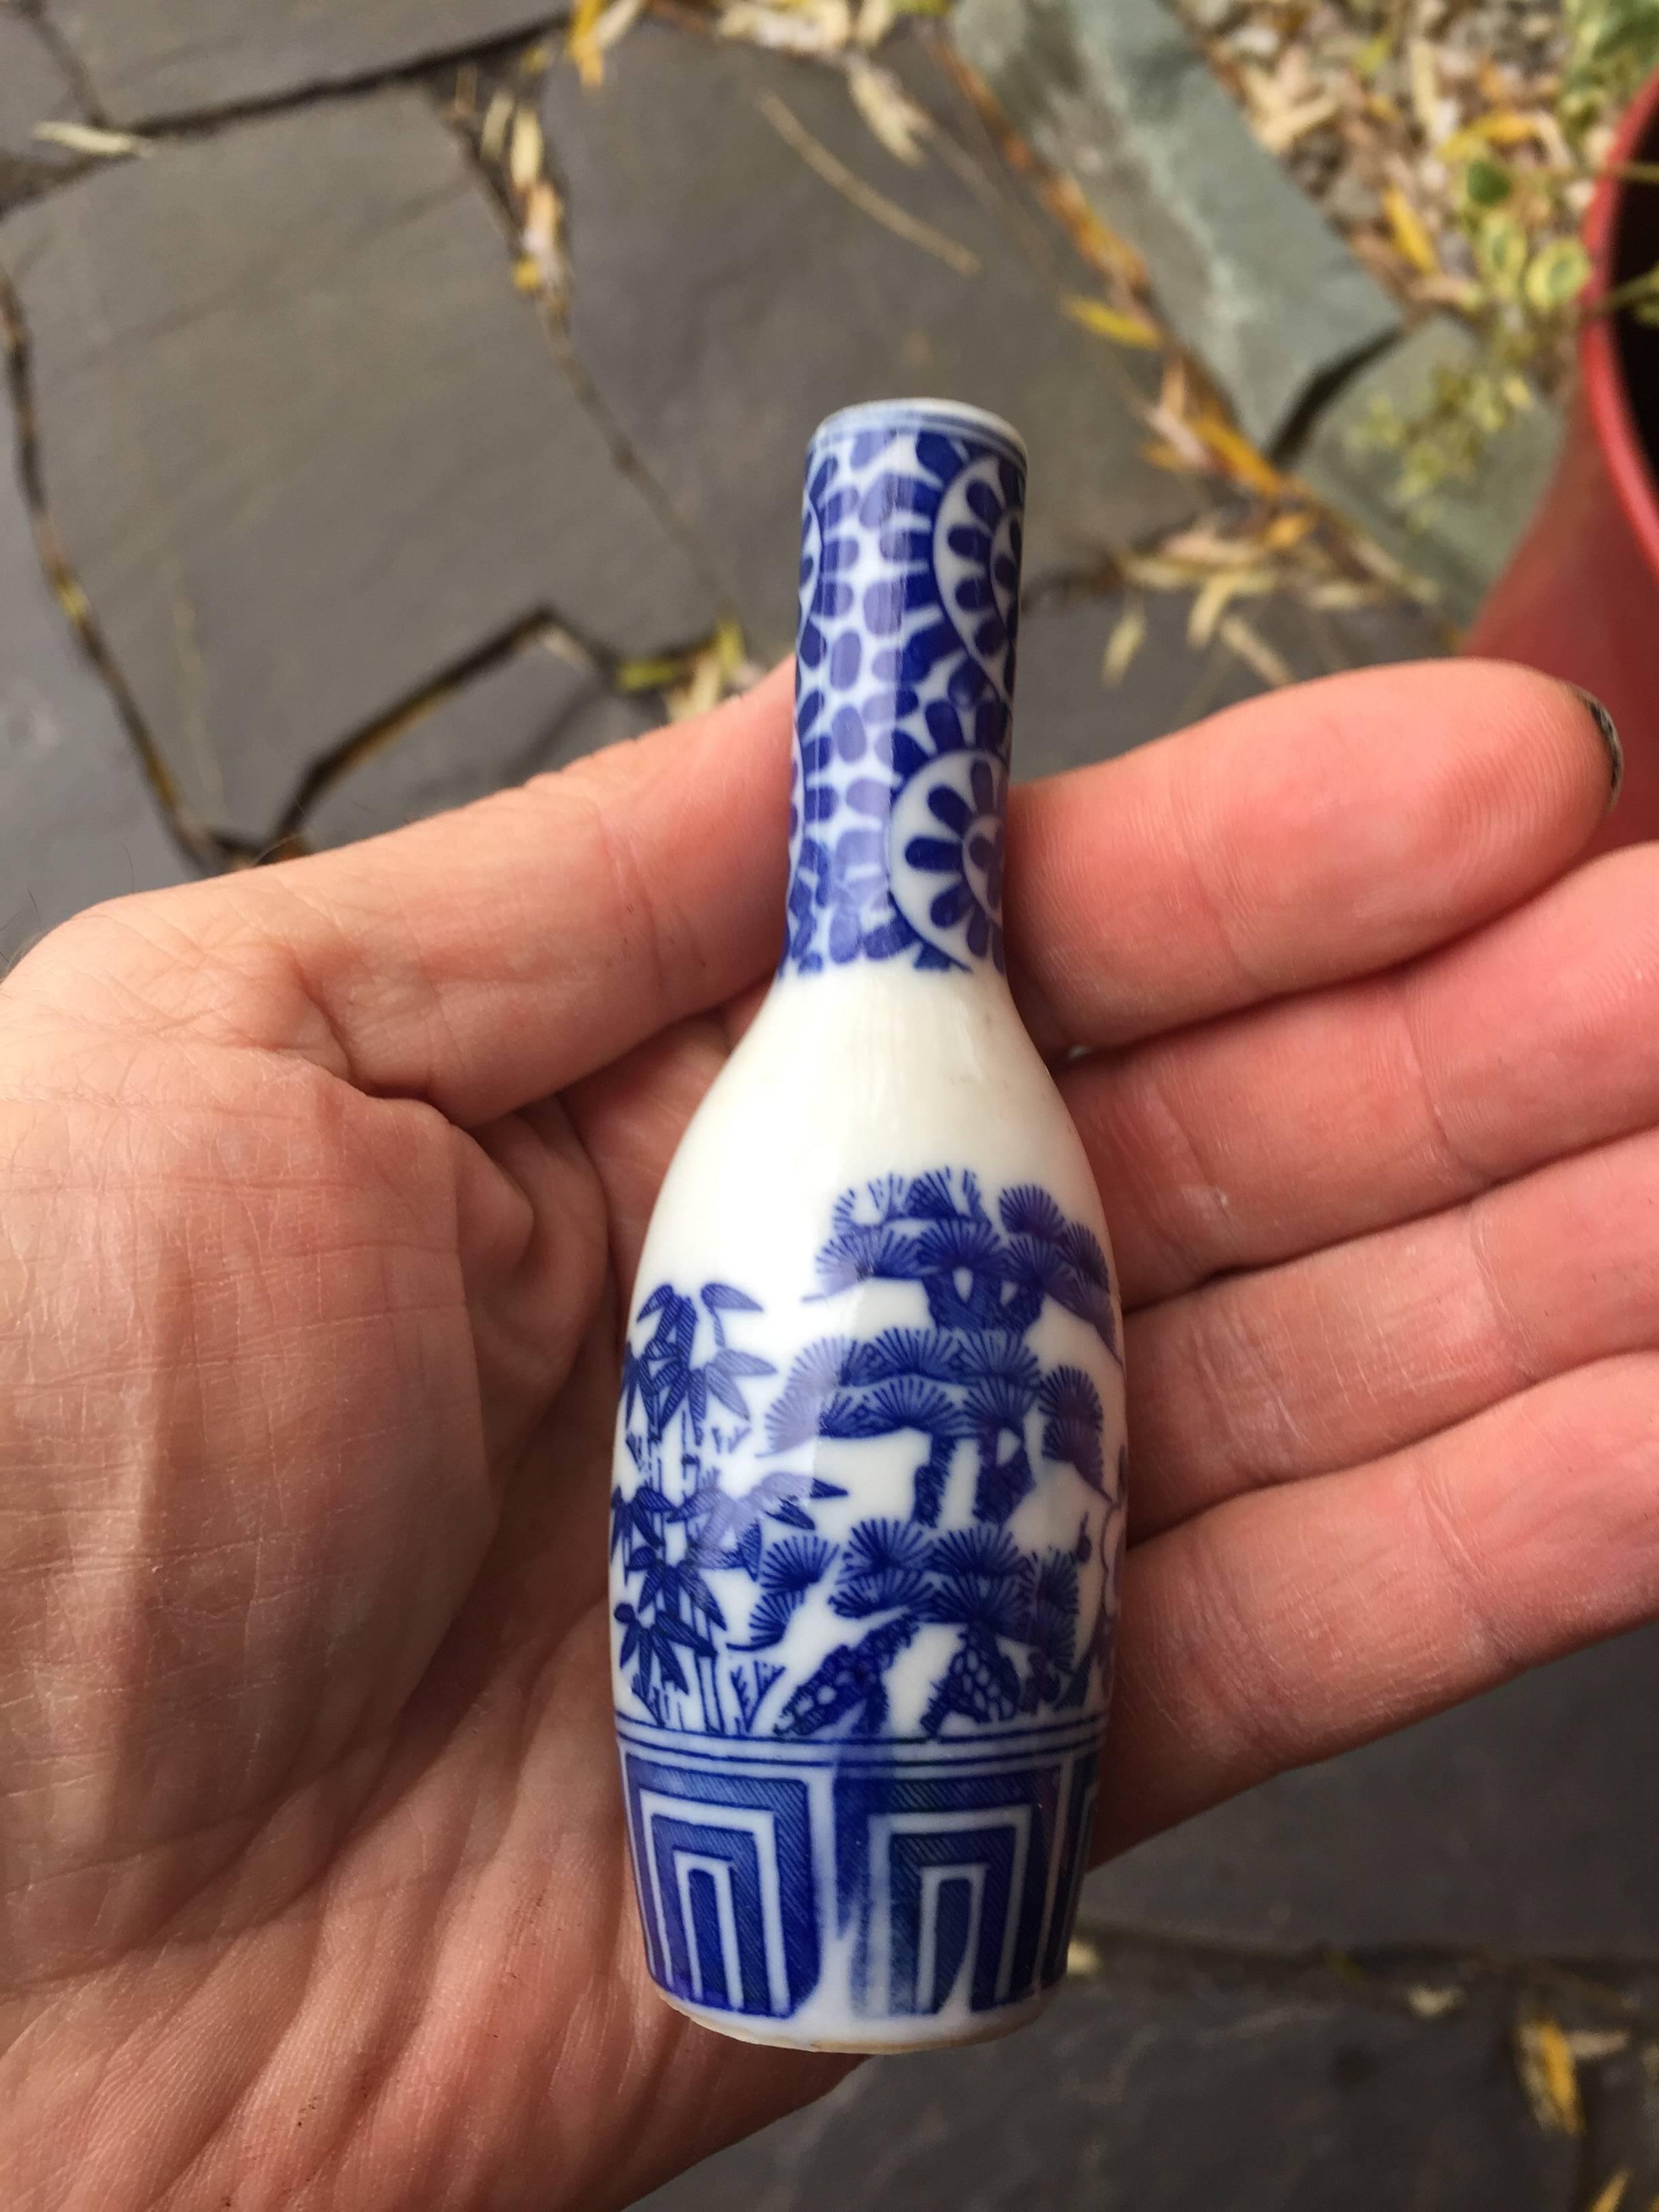 Japan, a collection of six antique blue and white porcelain sake bottles, 19th century. These are beautiful little gems, hand-painted in Classic floral patterns from the Arita kilns. Very good condition. Make unique bud vases and as